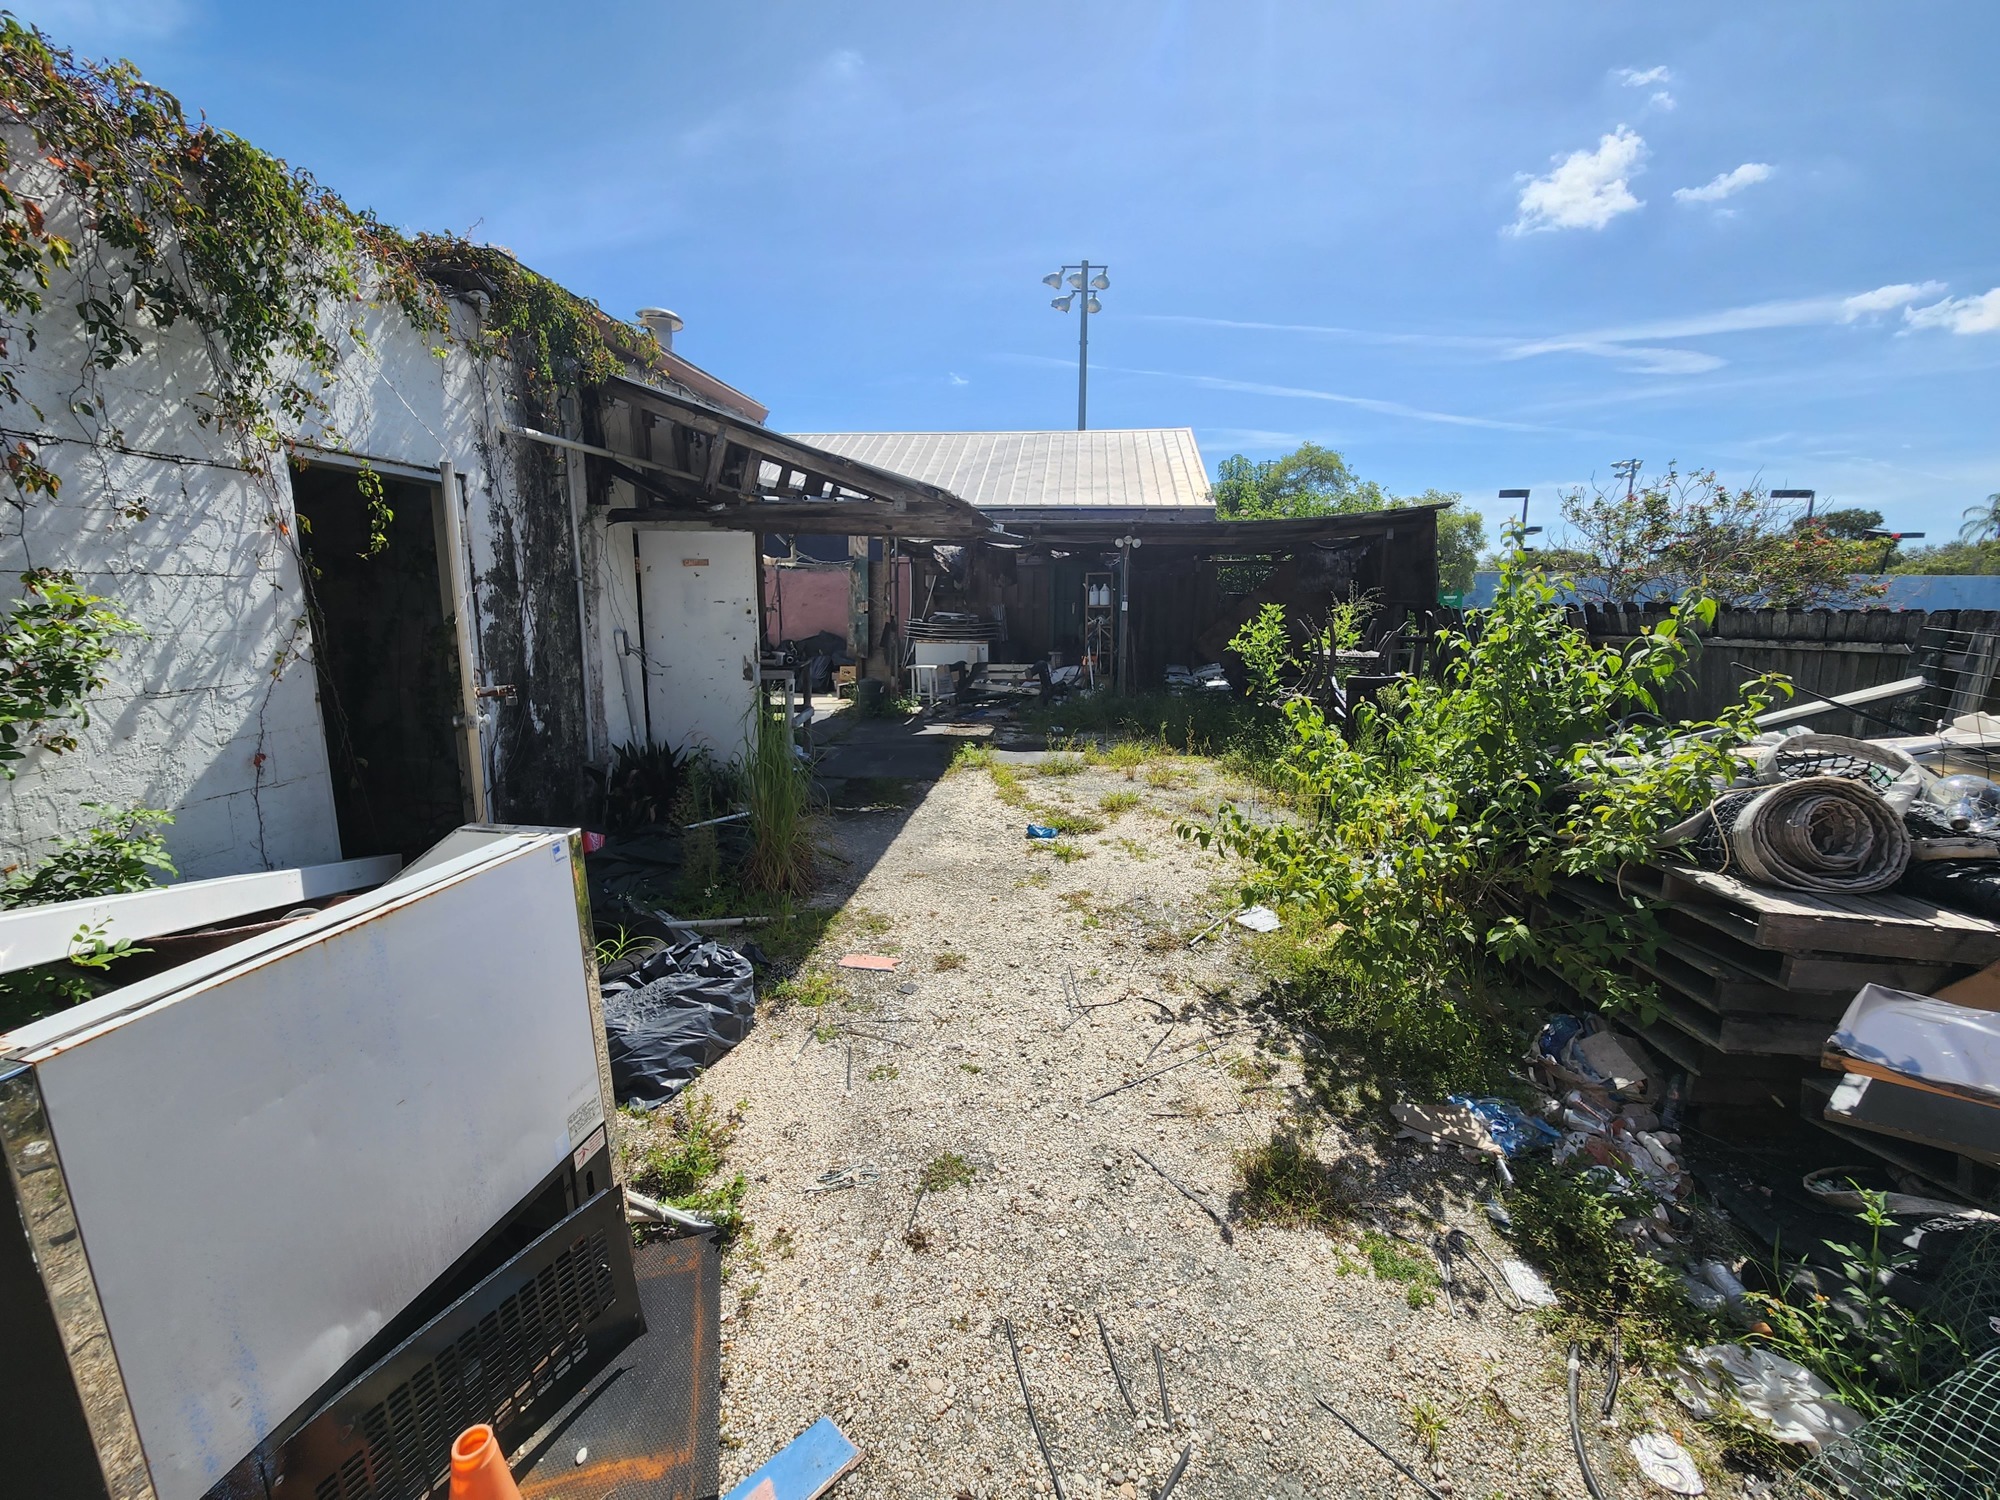 Abandoned since 2020, the Bath & Racquet Property has become a blight. (Andrew Warfield)